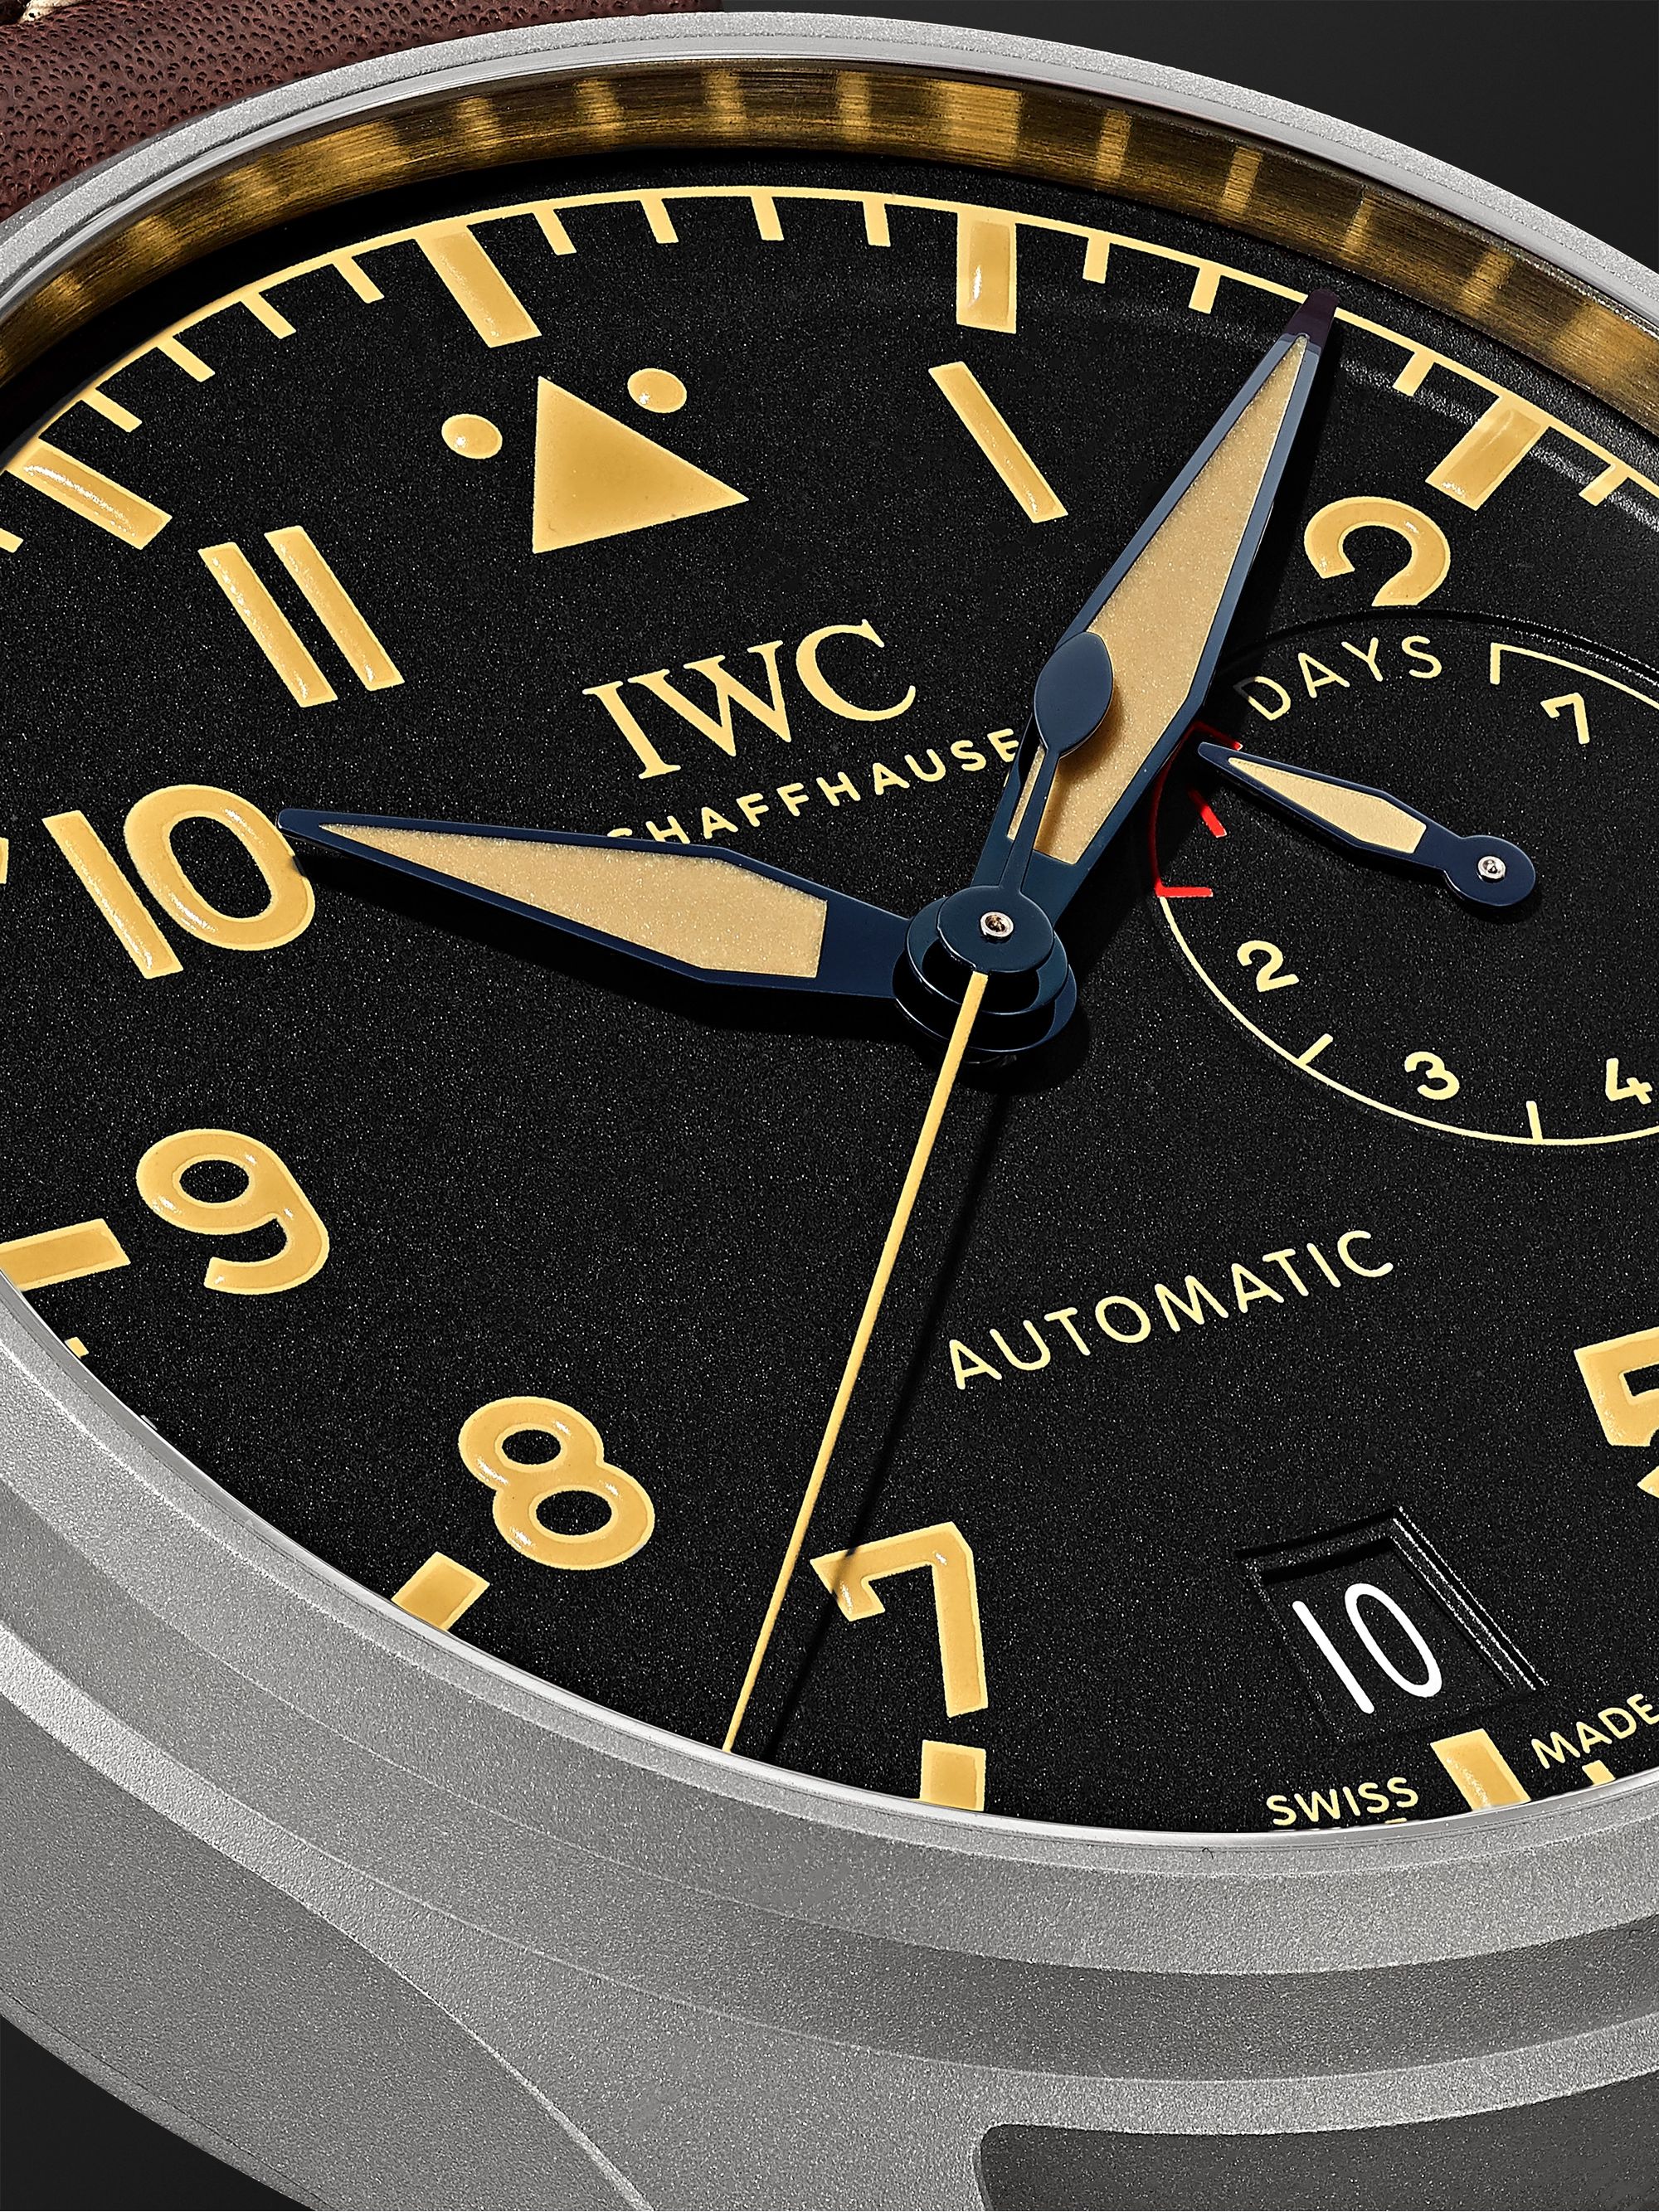 IWC SCHAFFHAUSEN Big Pilot's Heritage Automatic 46.2mm Titanium and Leather Watch, Ref. No. IW501004